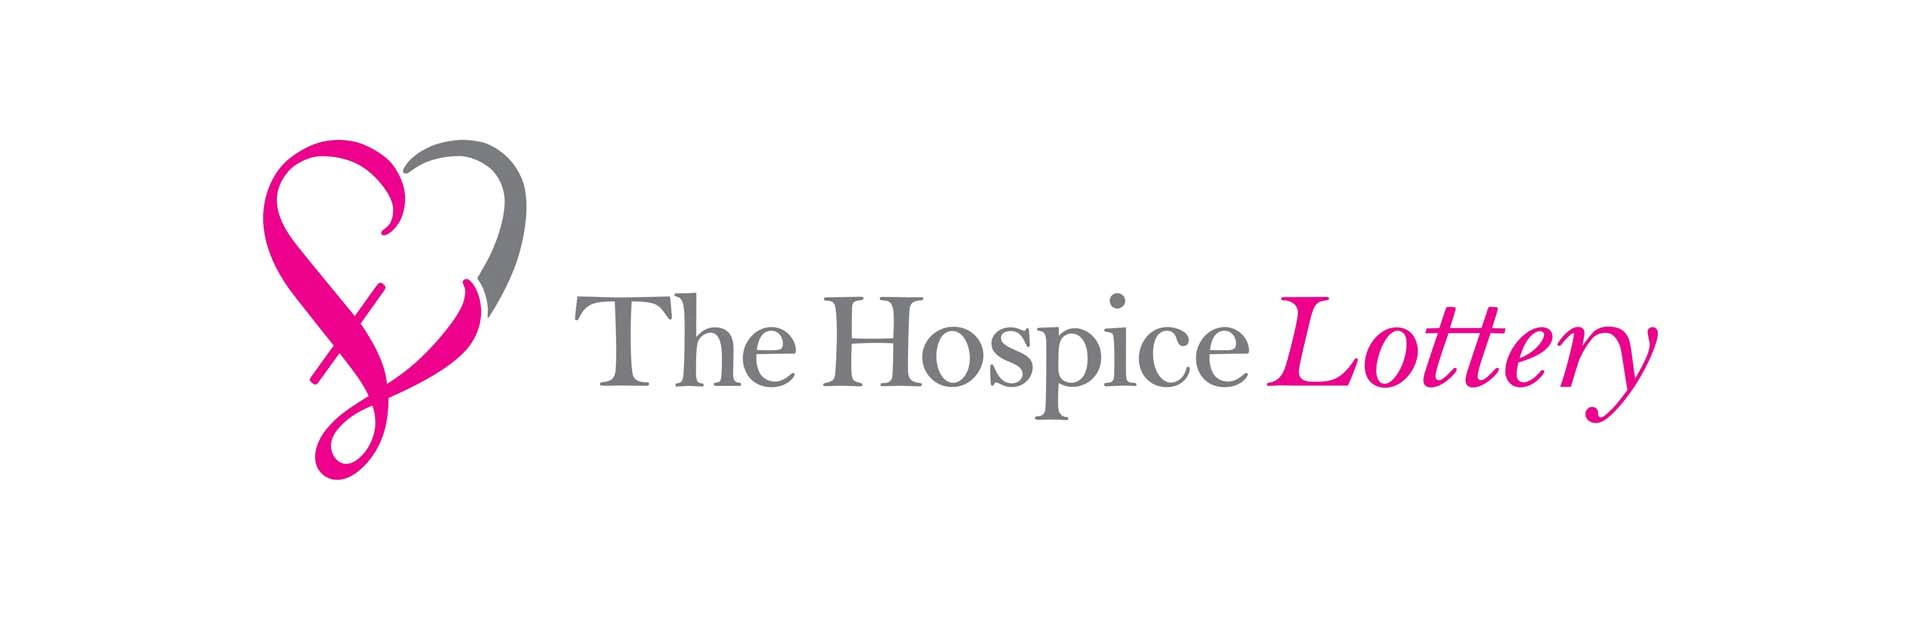 the hospice lottery